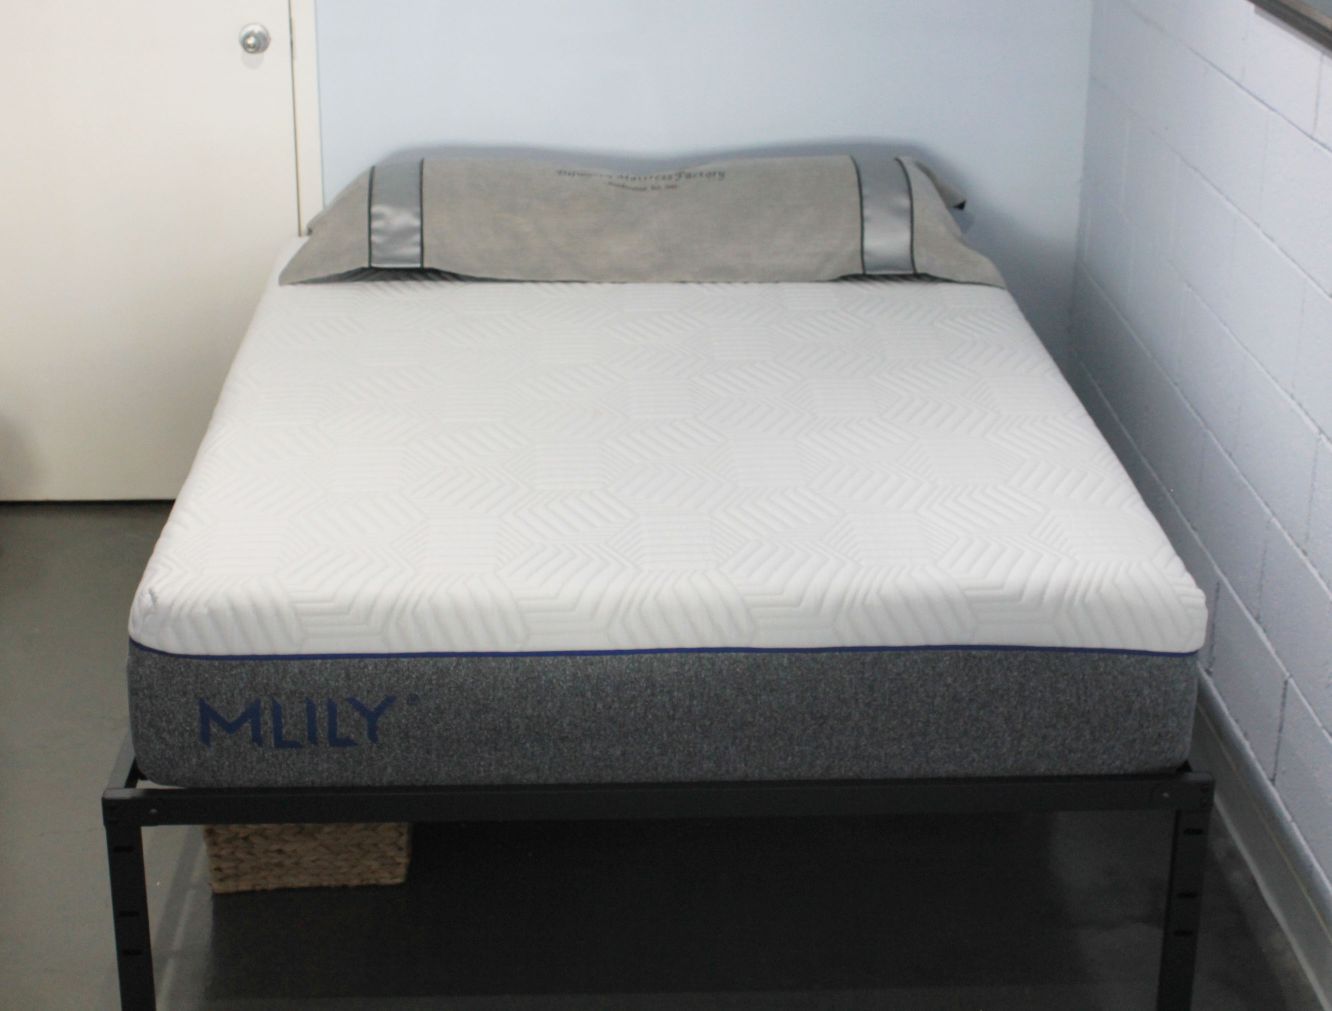 Mlilly Mattress by Dilworth Mattress Factory has a 12-inch Hybrid Mattress with Advanced Technology and Cooling Knit Fabric.